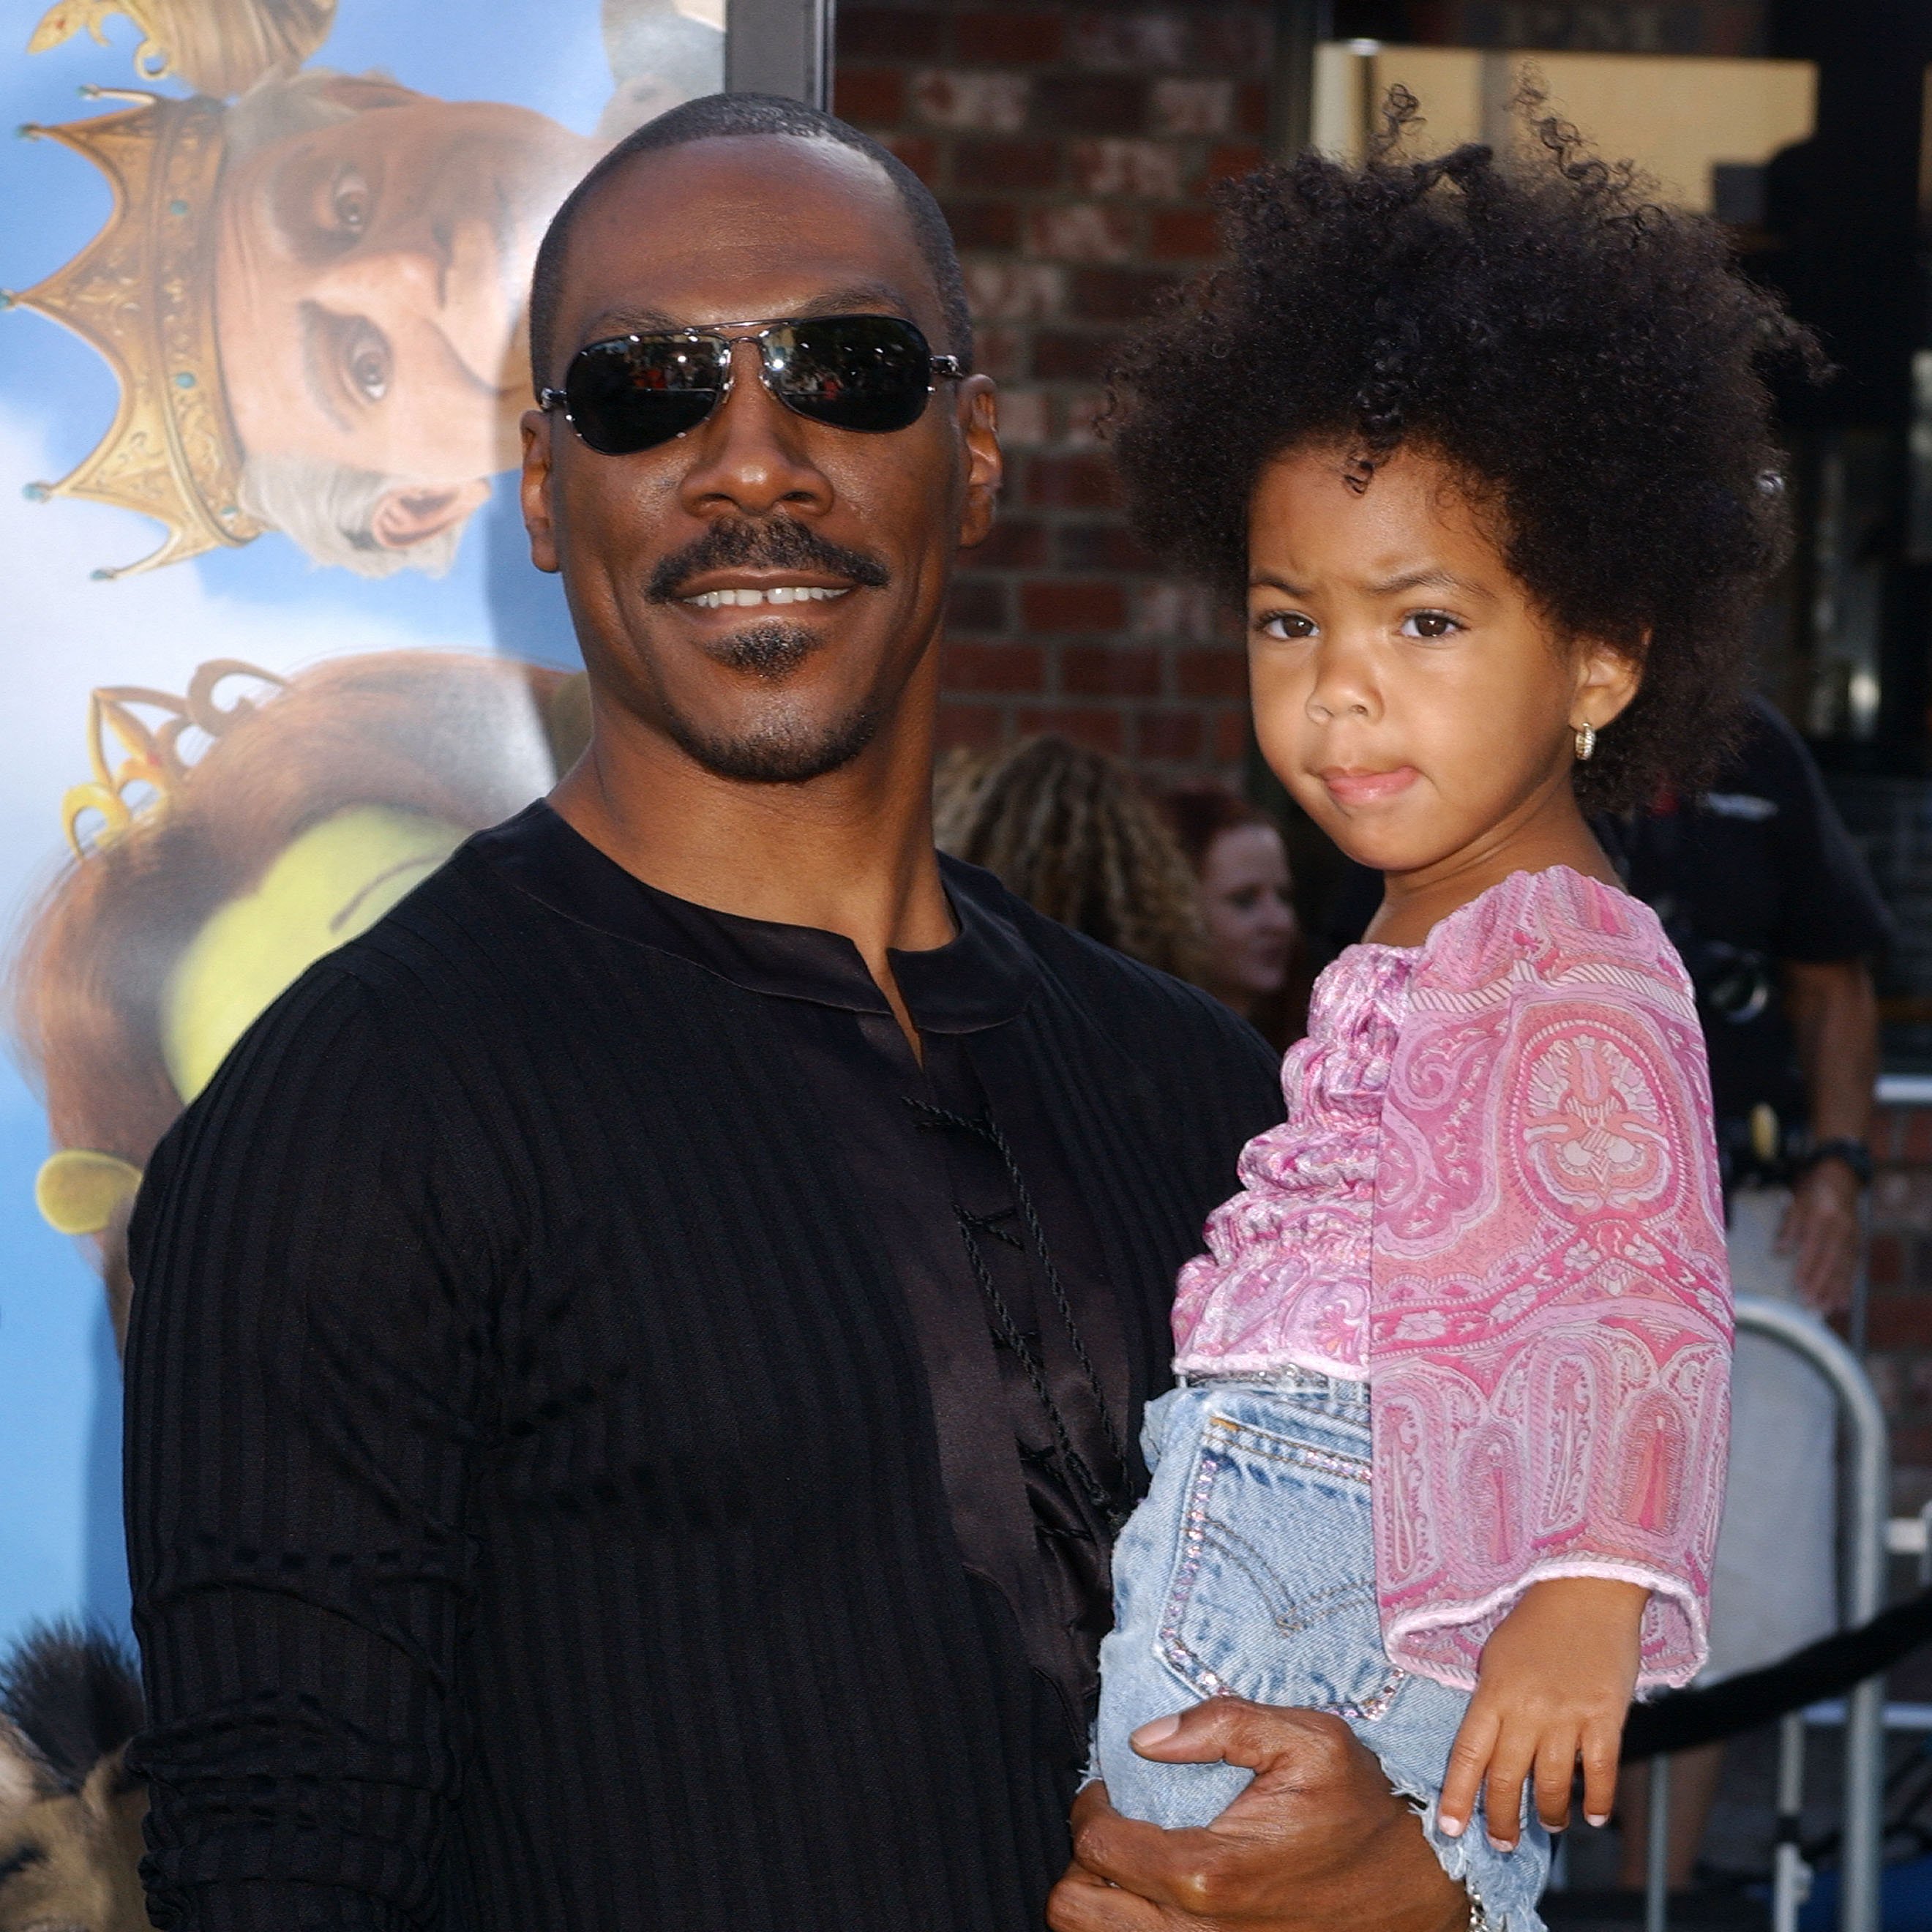 Eddie Murphy and his daughter during the "Shrek 2" - Los Angeles premiere in Westwood, California, on May 8, 2004. | Source: Getty Images